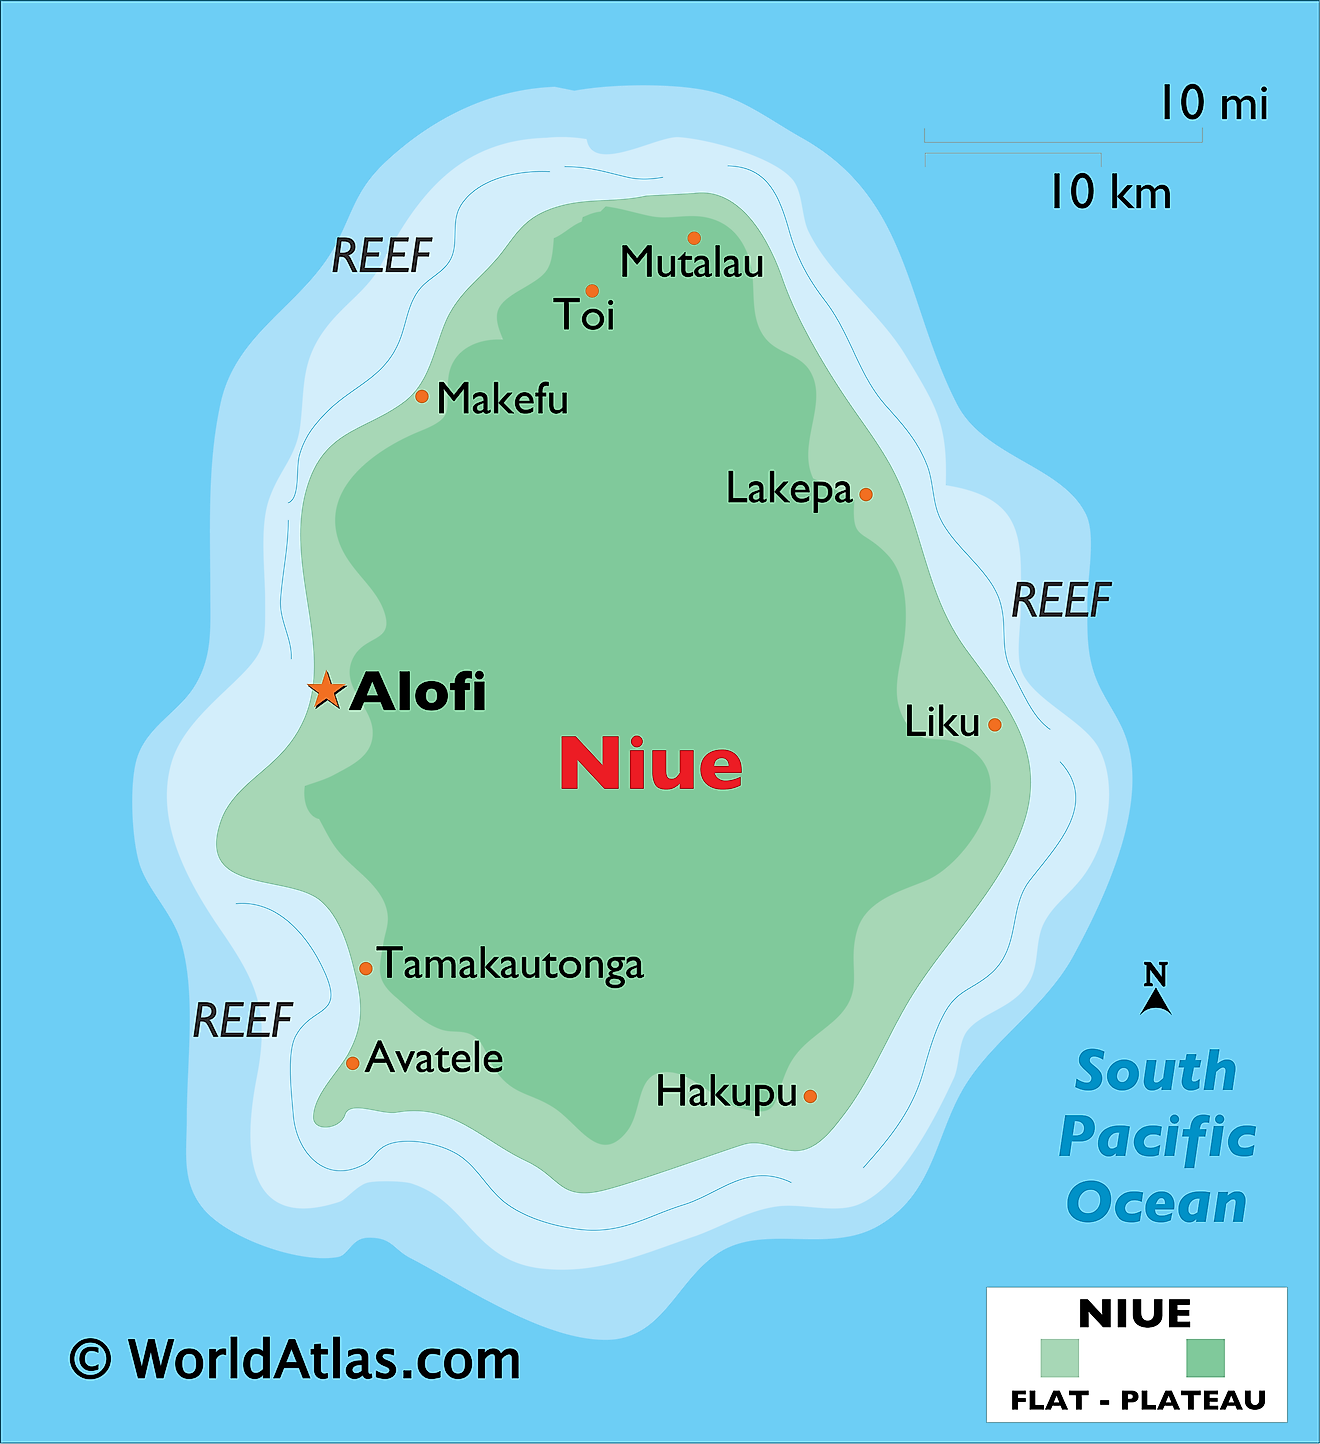 Physical Map of Niue showing relief, important settlements, etc.